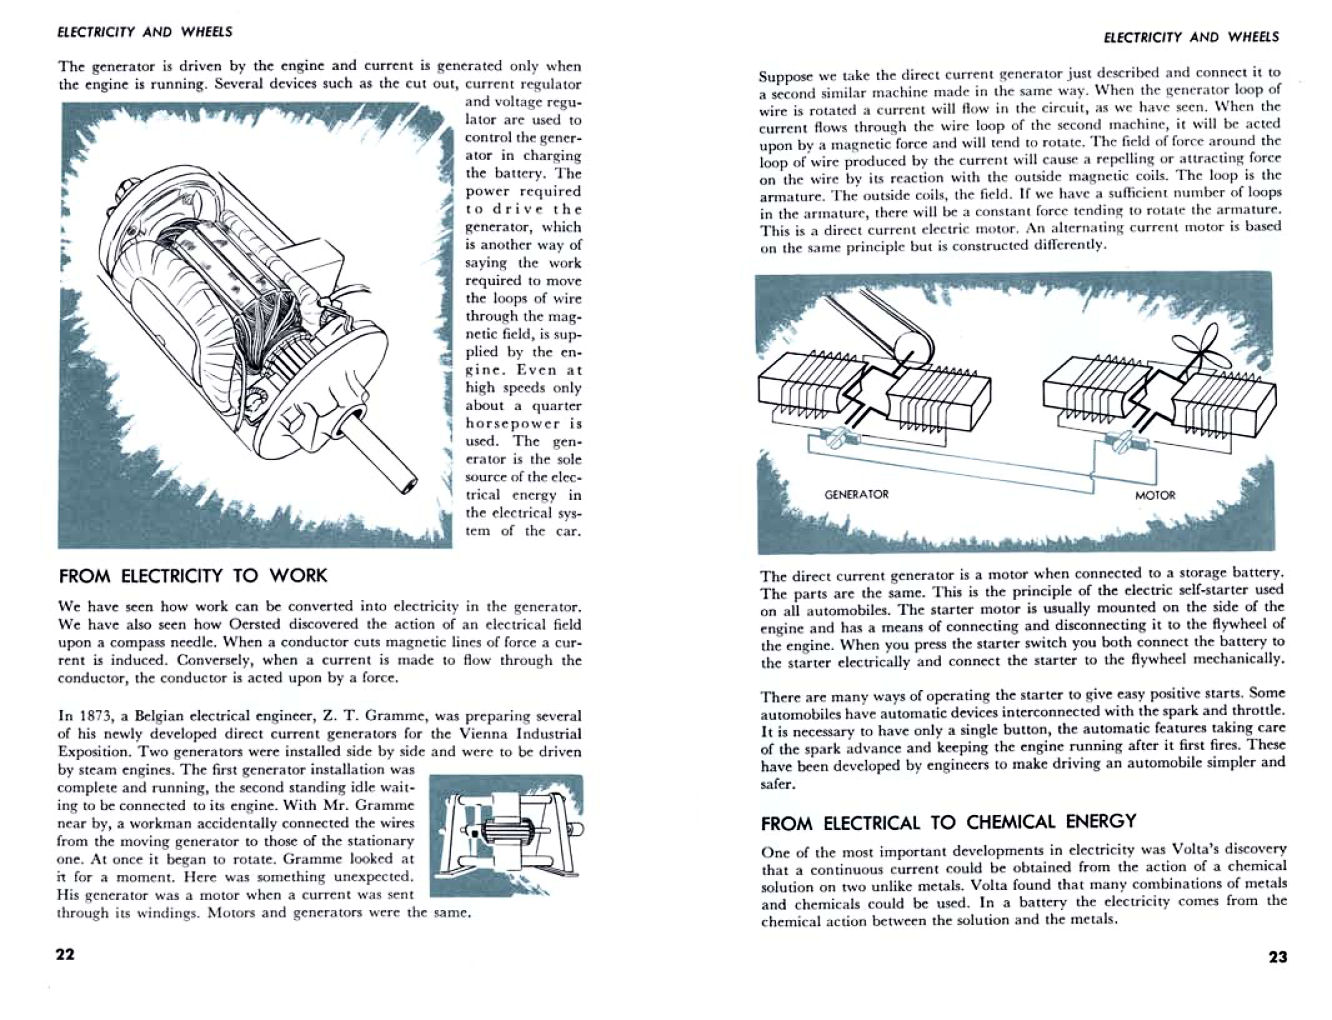 1953-Electricity_and_Wheels-22-23